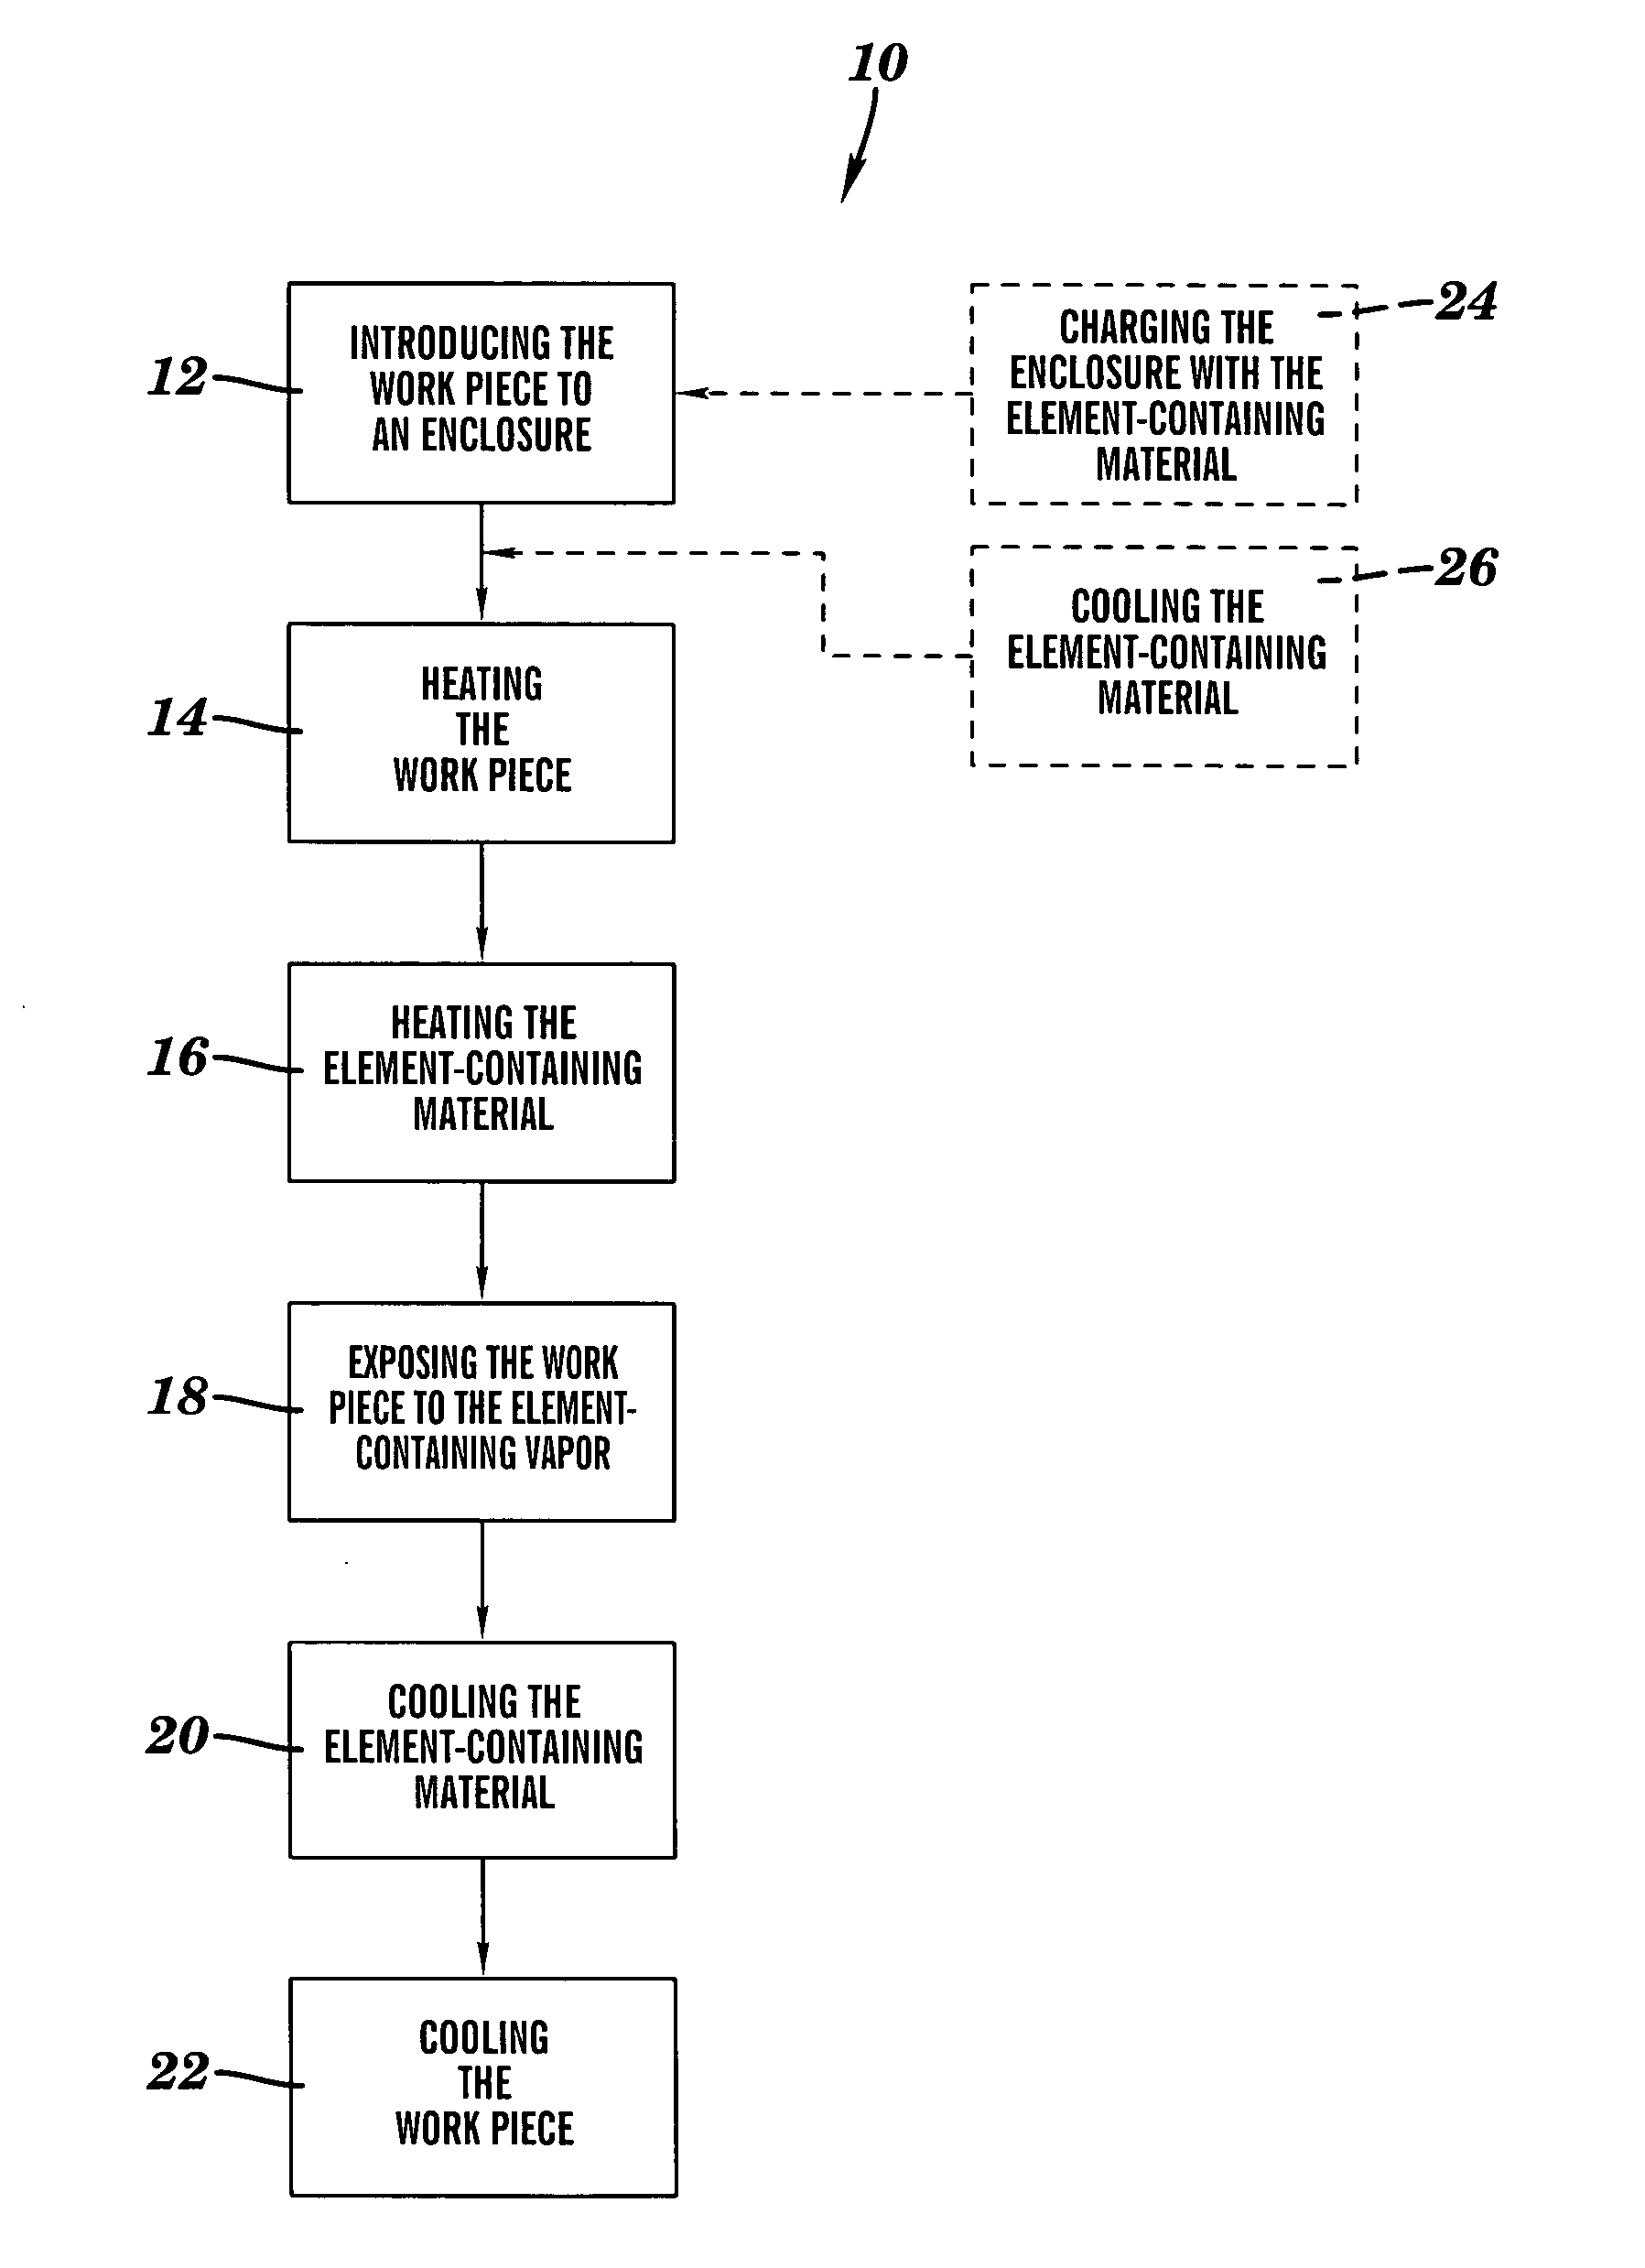 Methods and apparatus for treating a work piece with a vaporous element